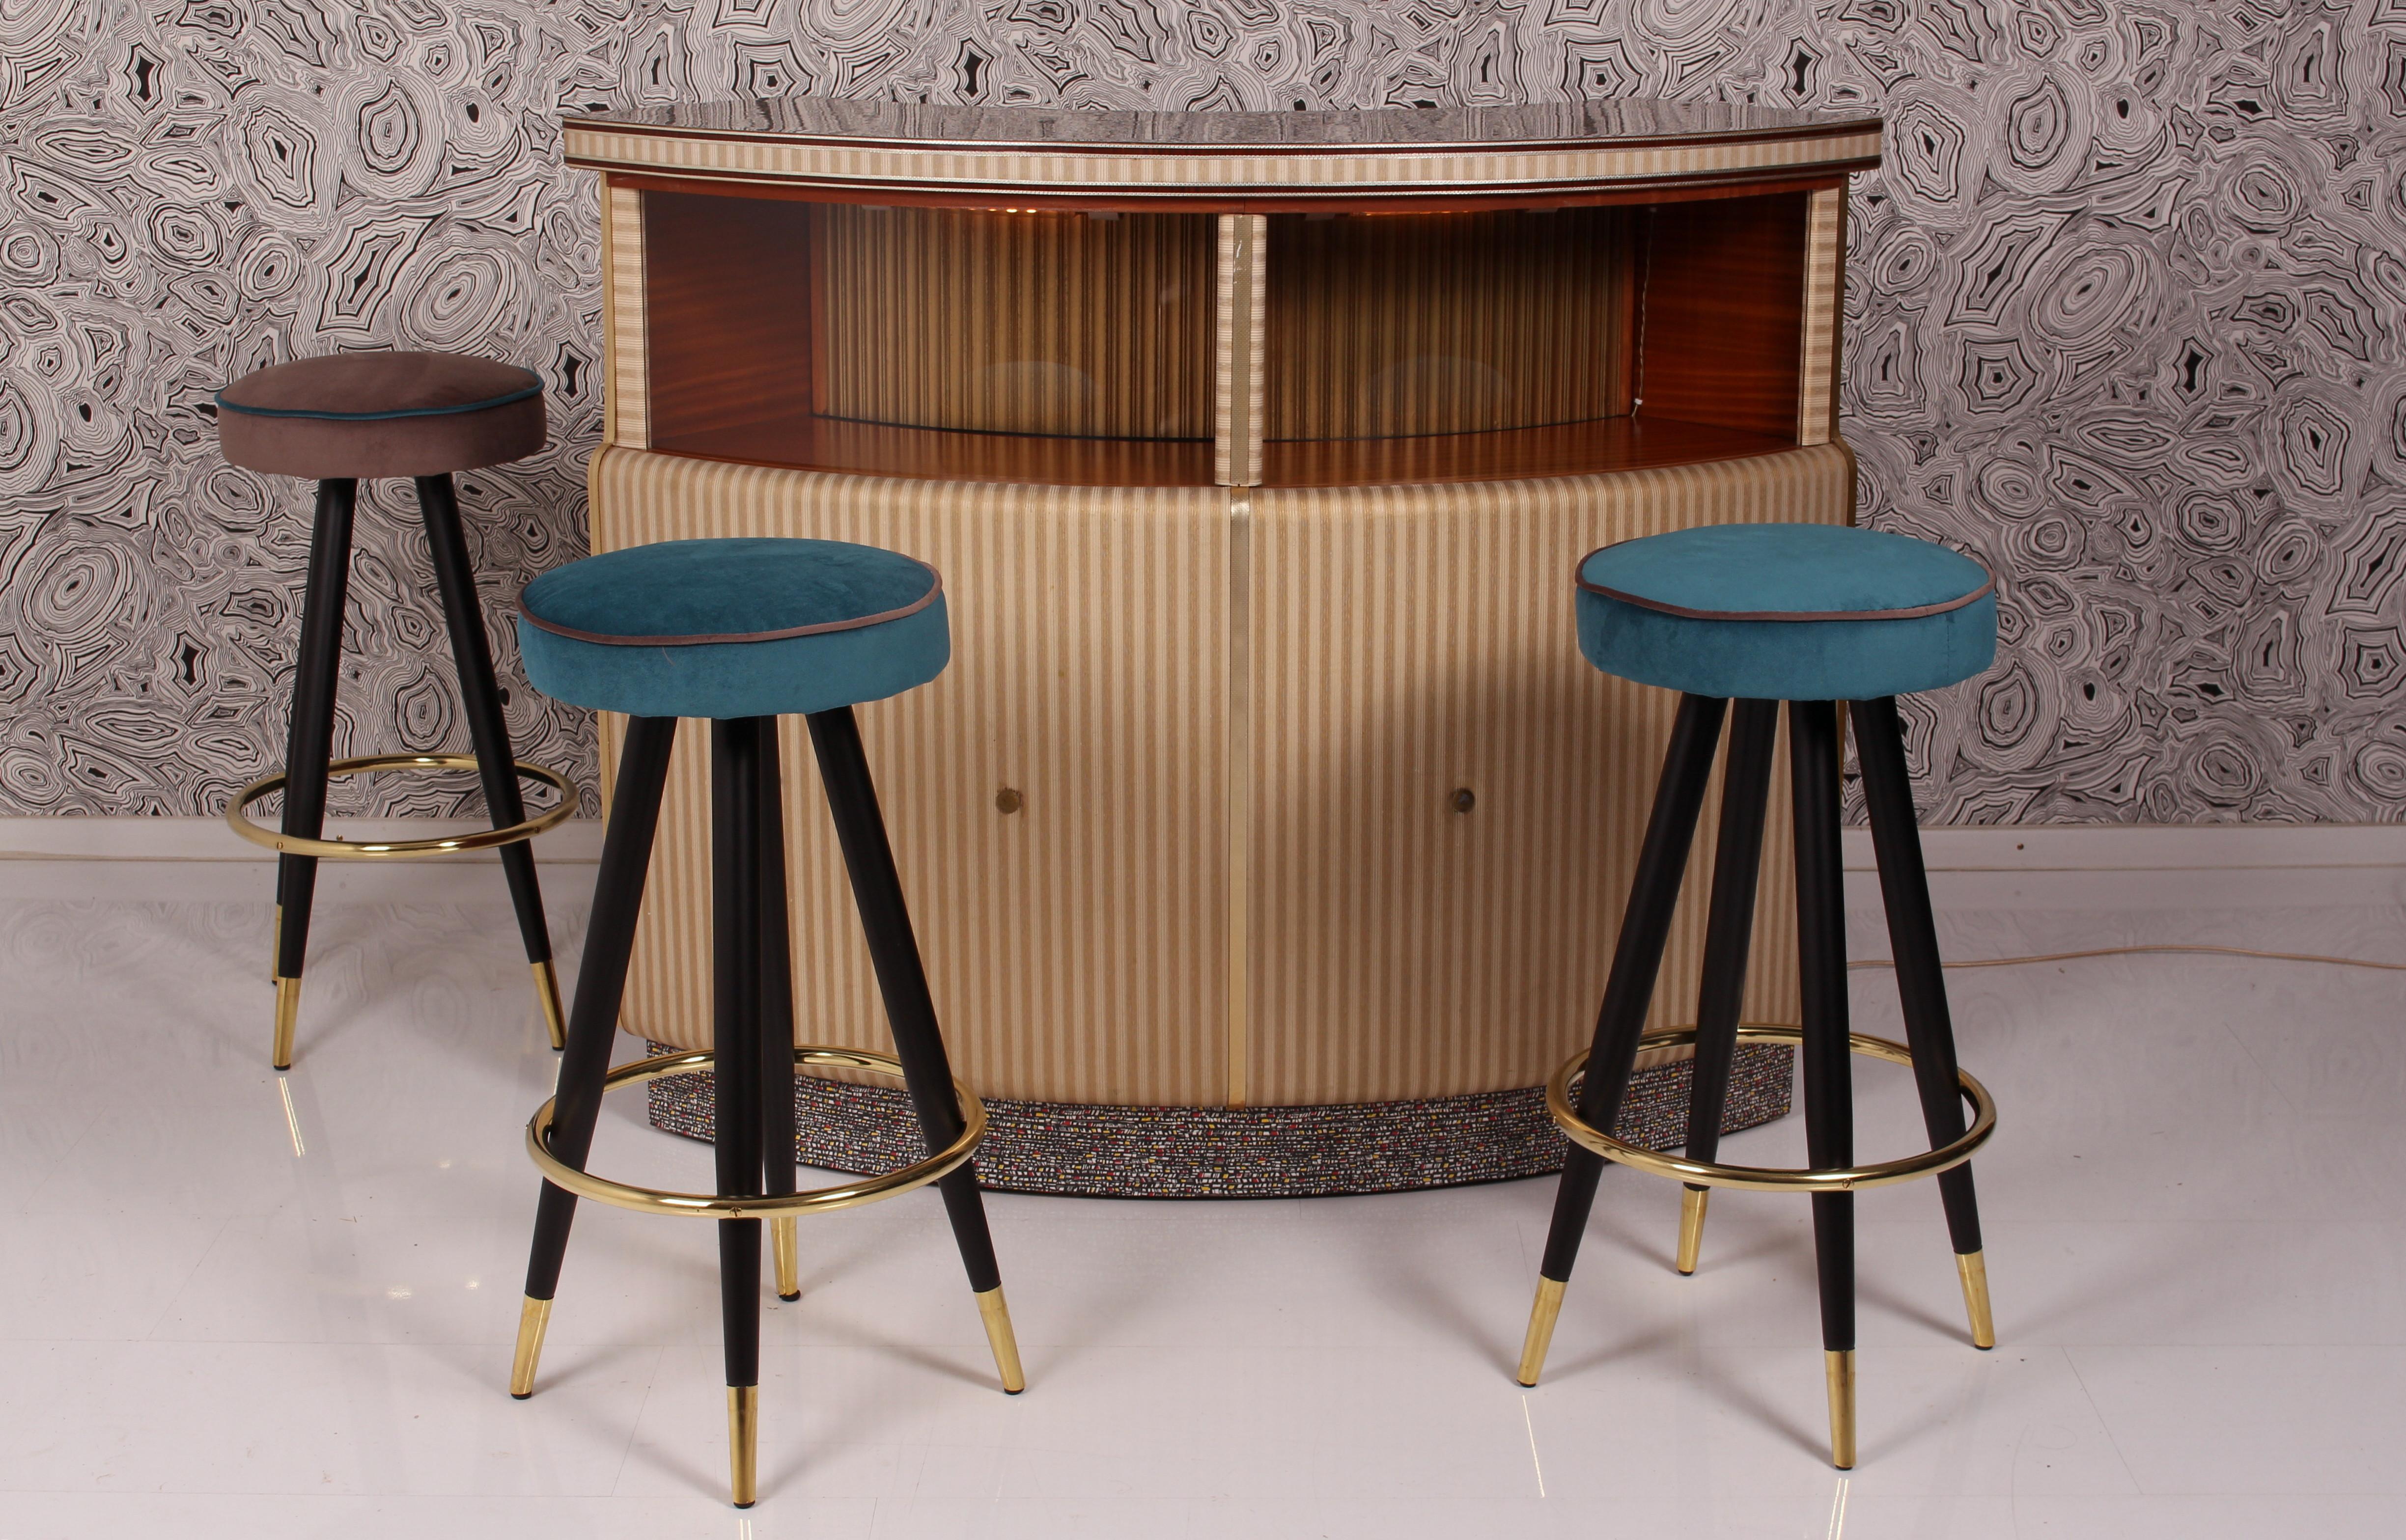 Midcentury Cocktail Bar Made in England a. Umberto Mascagni Drinks Bar Counter For Sale 2